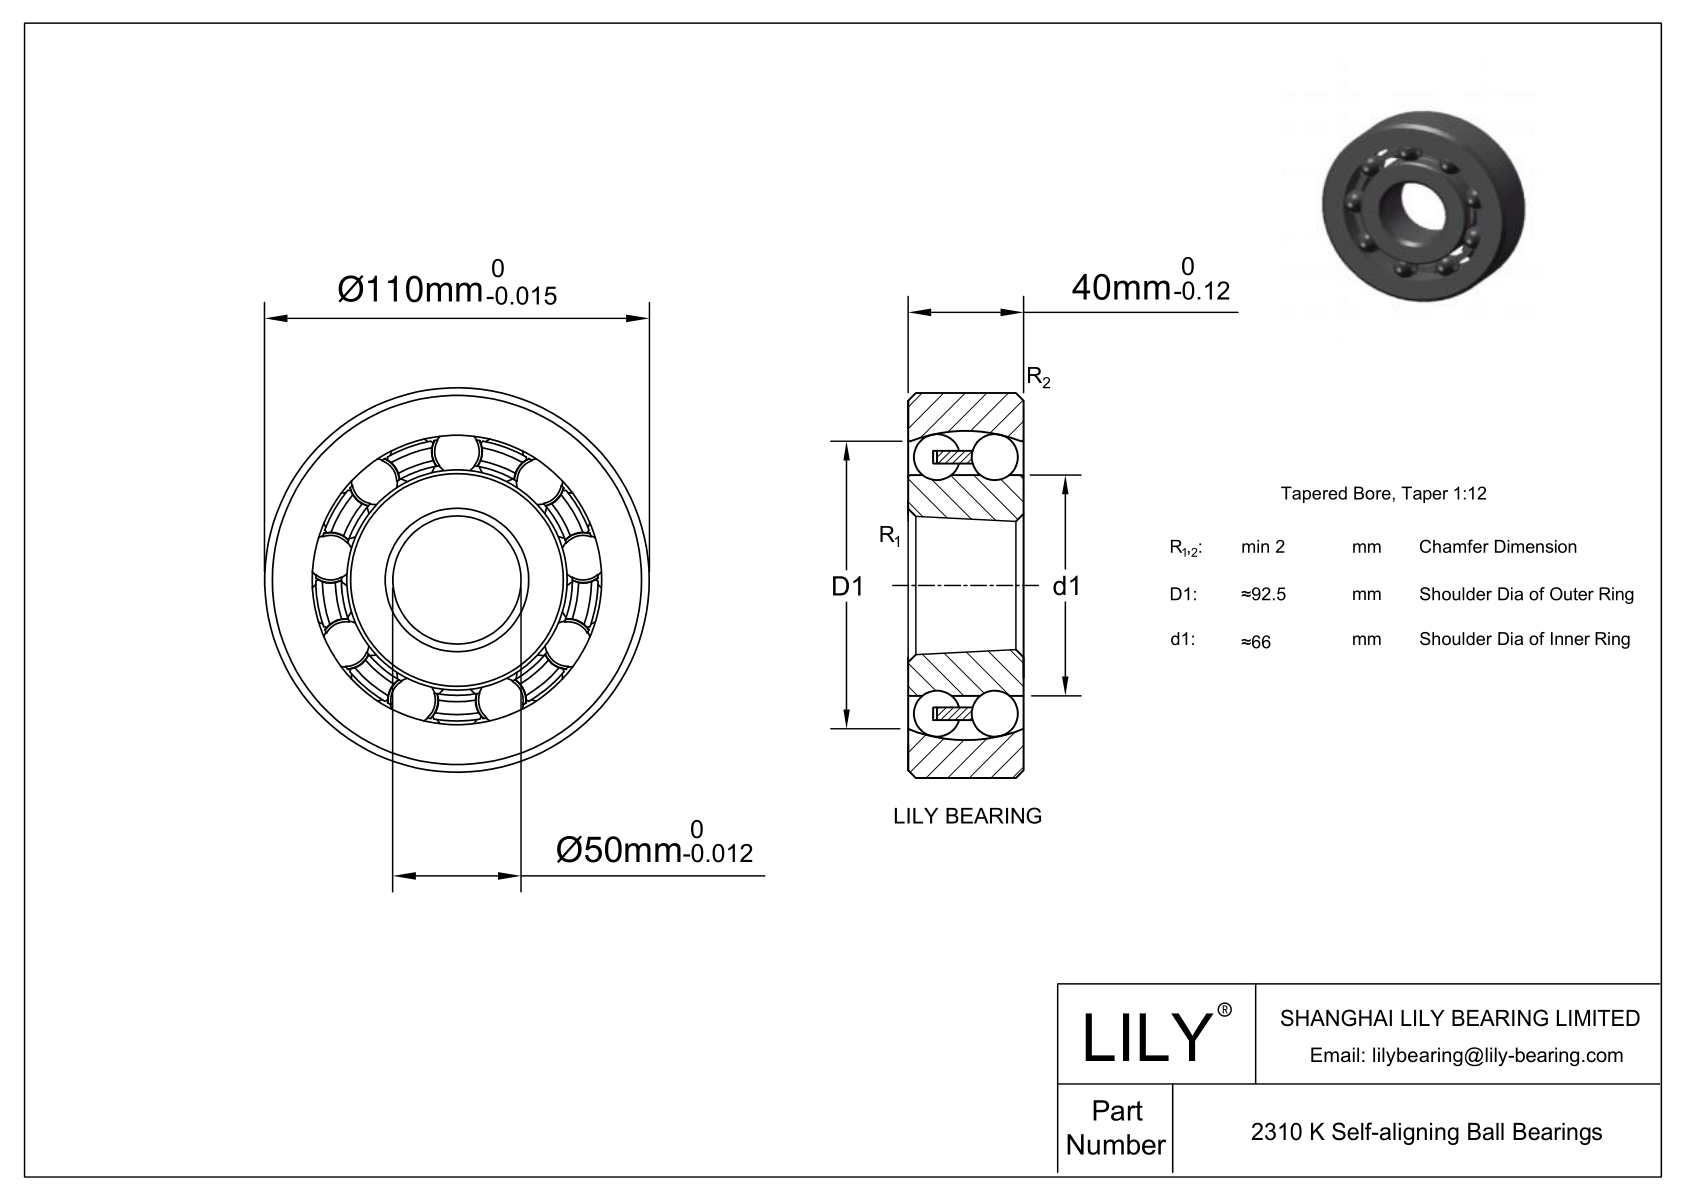 S2310 K Stainless Steel Self Aligning Ball Bearings cad drawing